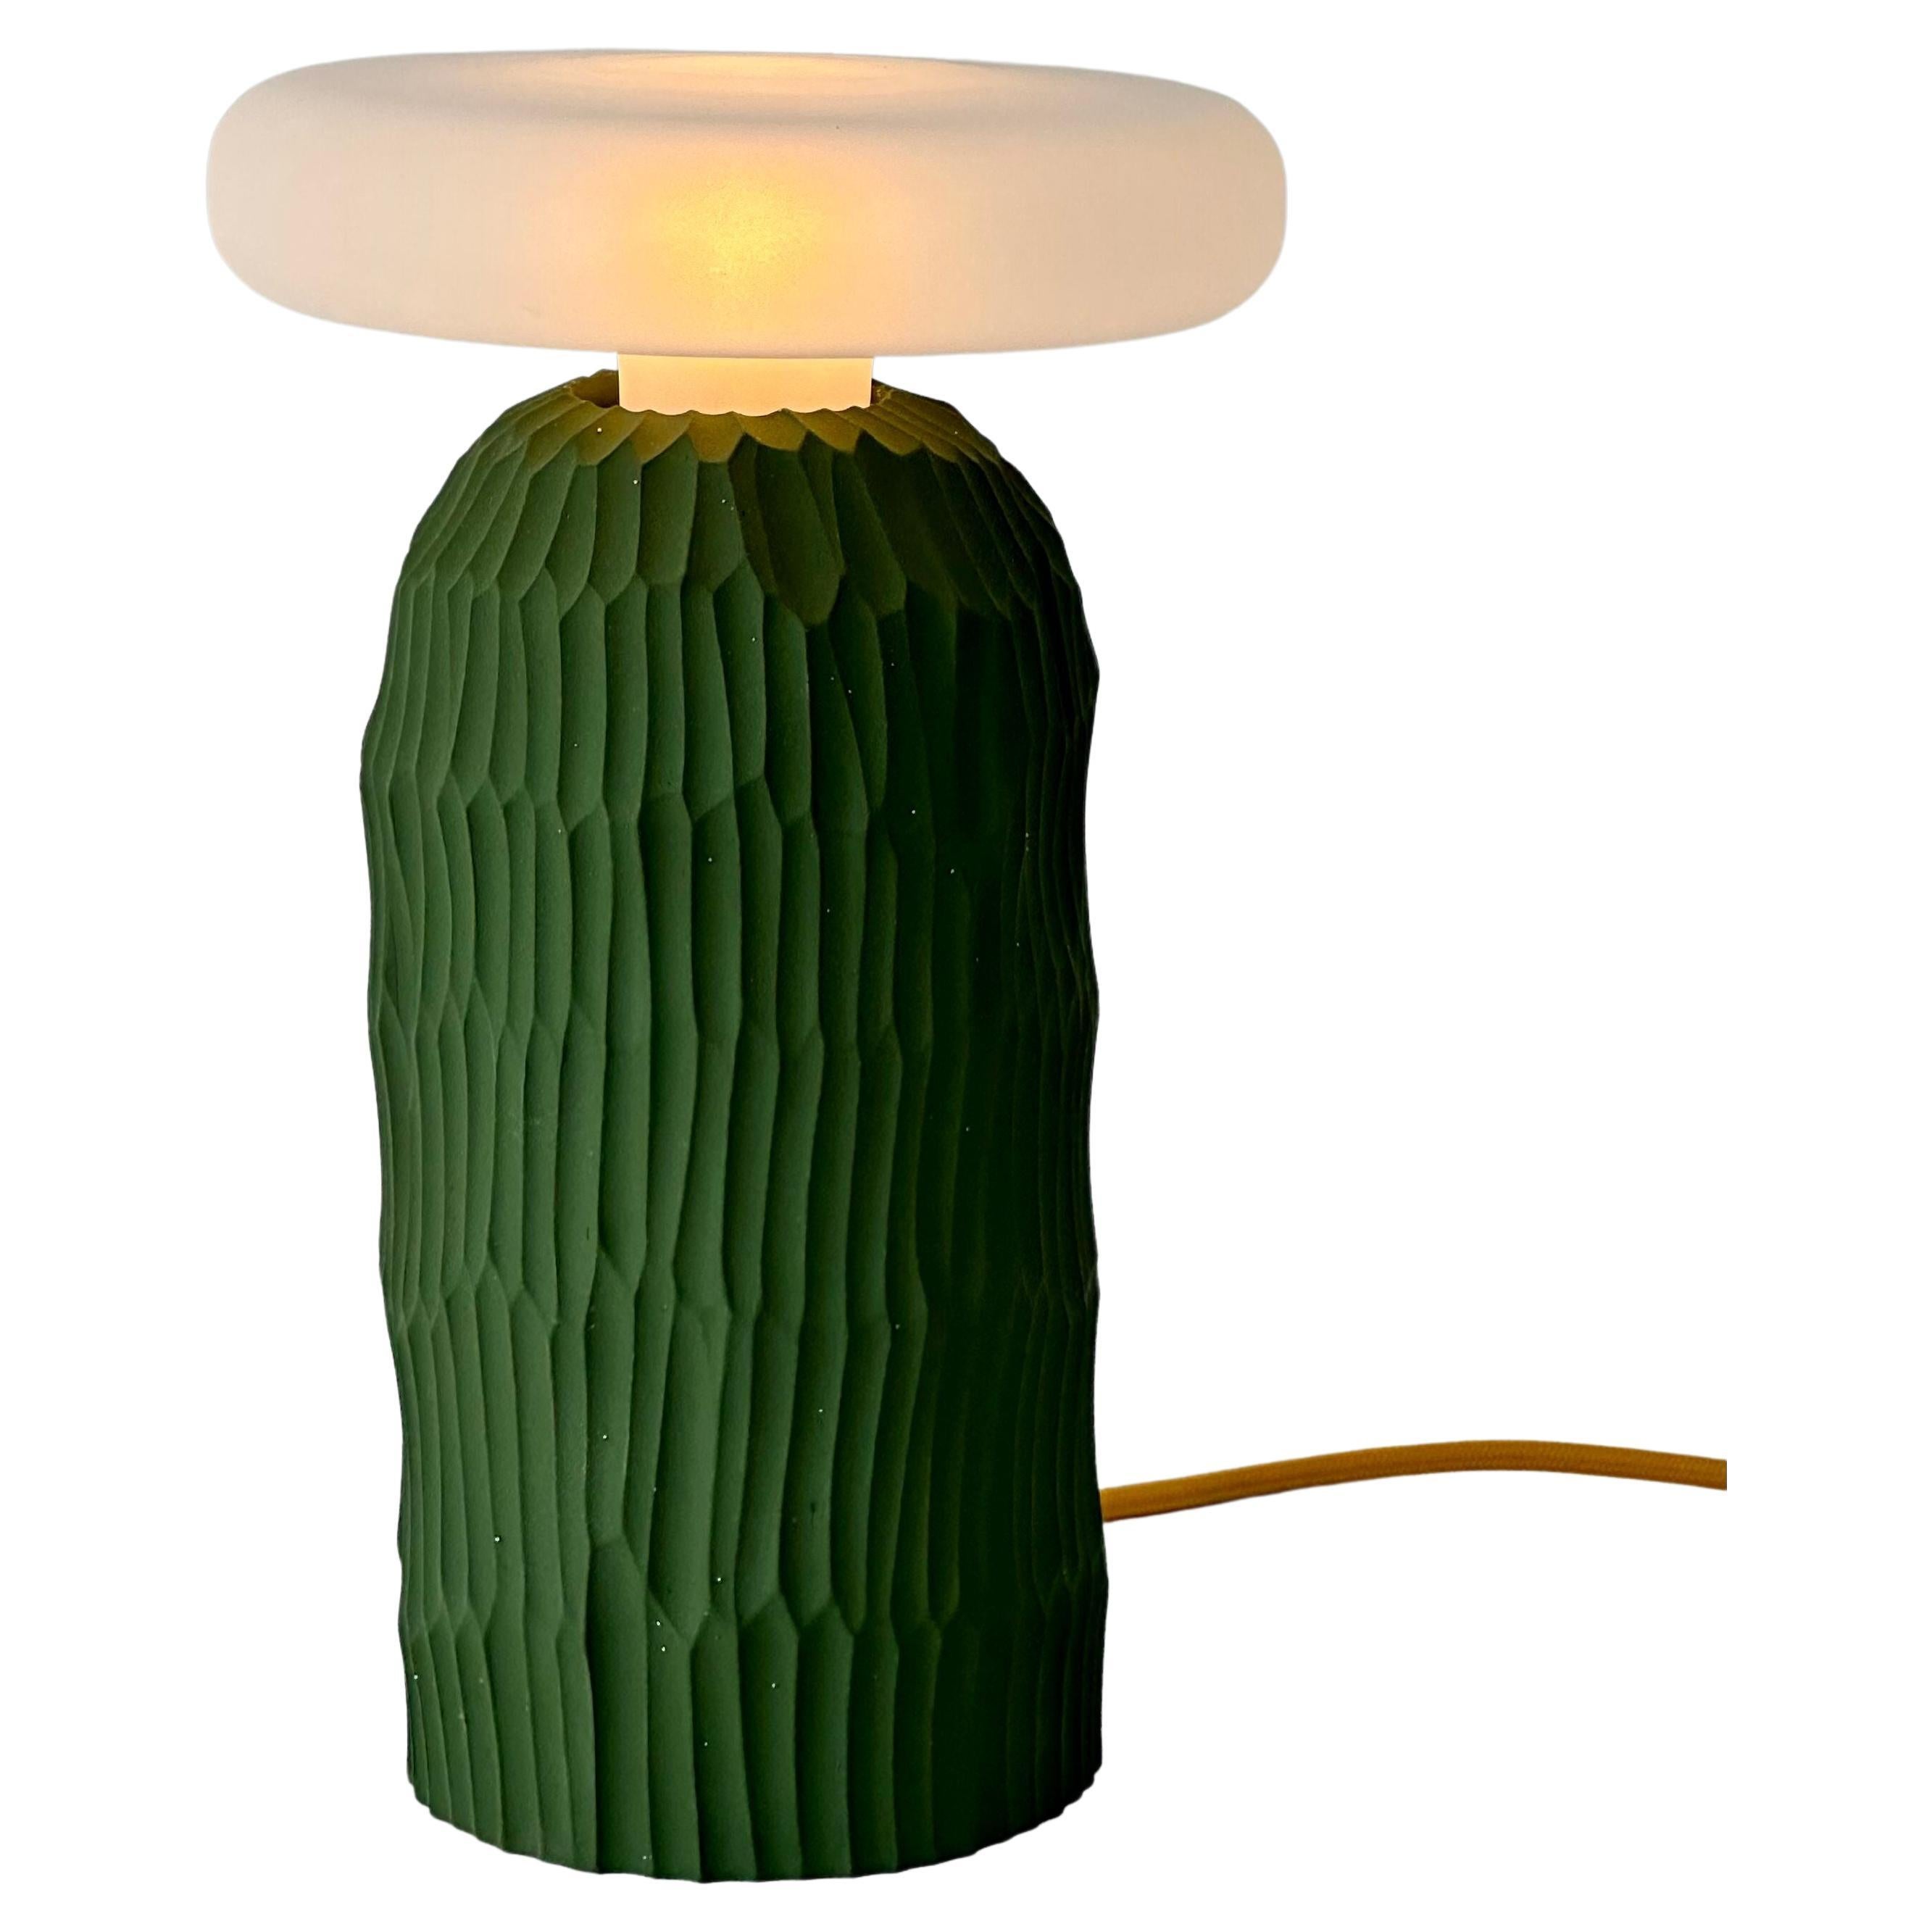 The Lamp, Flat in Olive Green For Sale